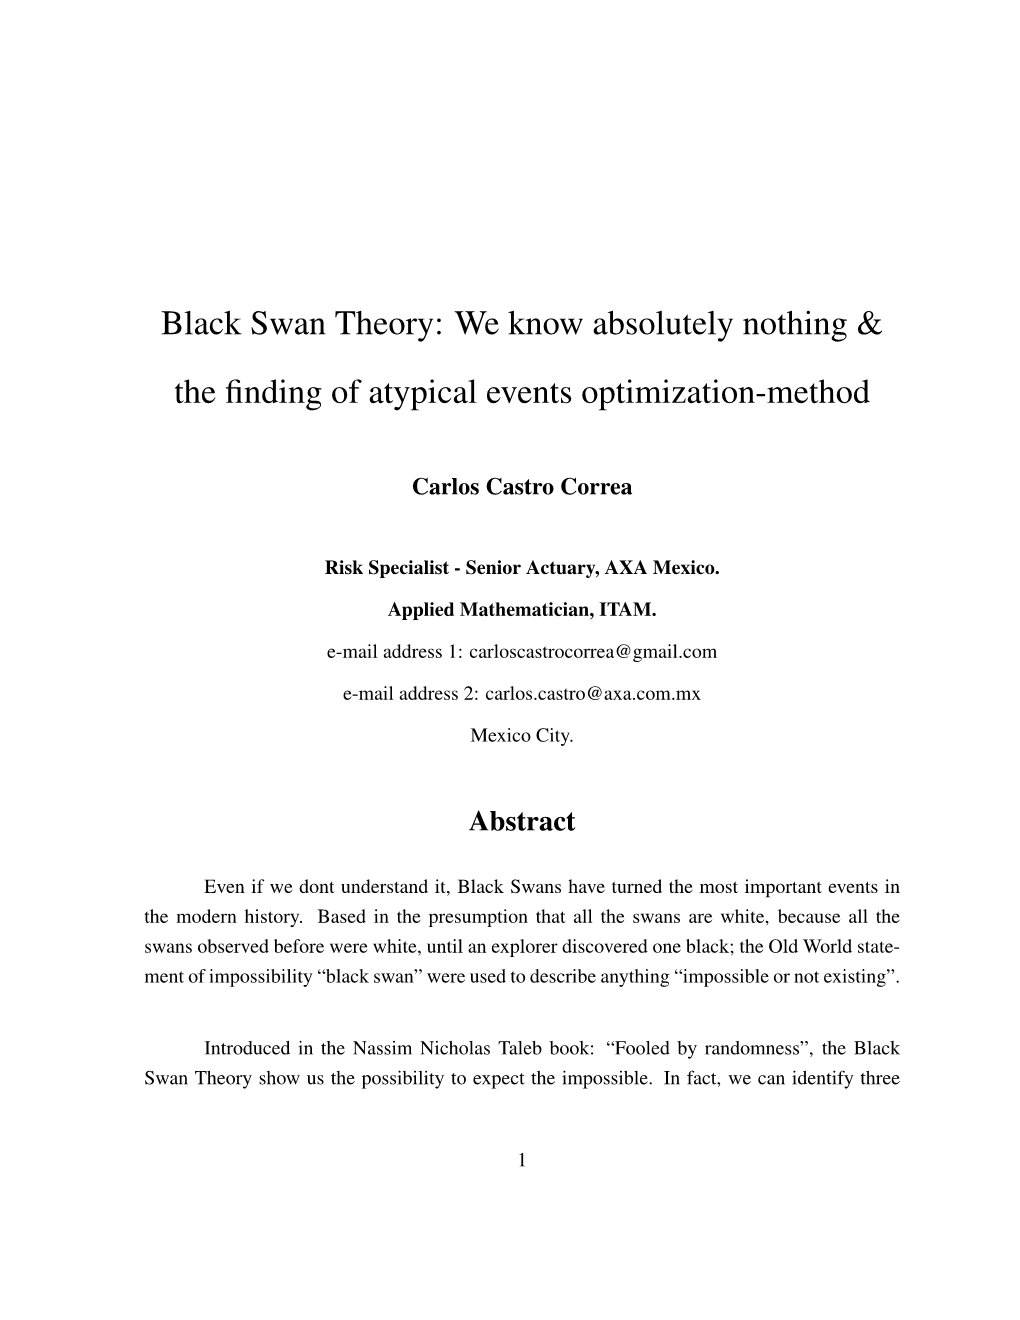 Black Swan Theory: We Know Absolutely Nothing & the ﬁnding of Atypical Events Optimization-Method